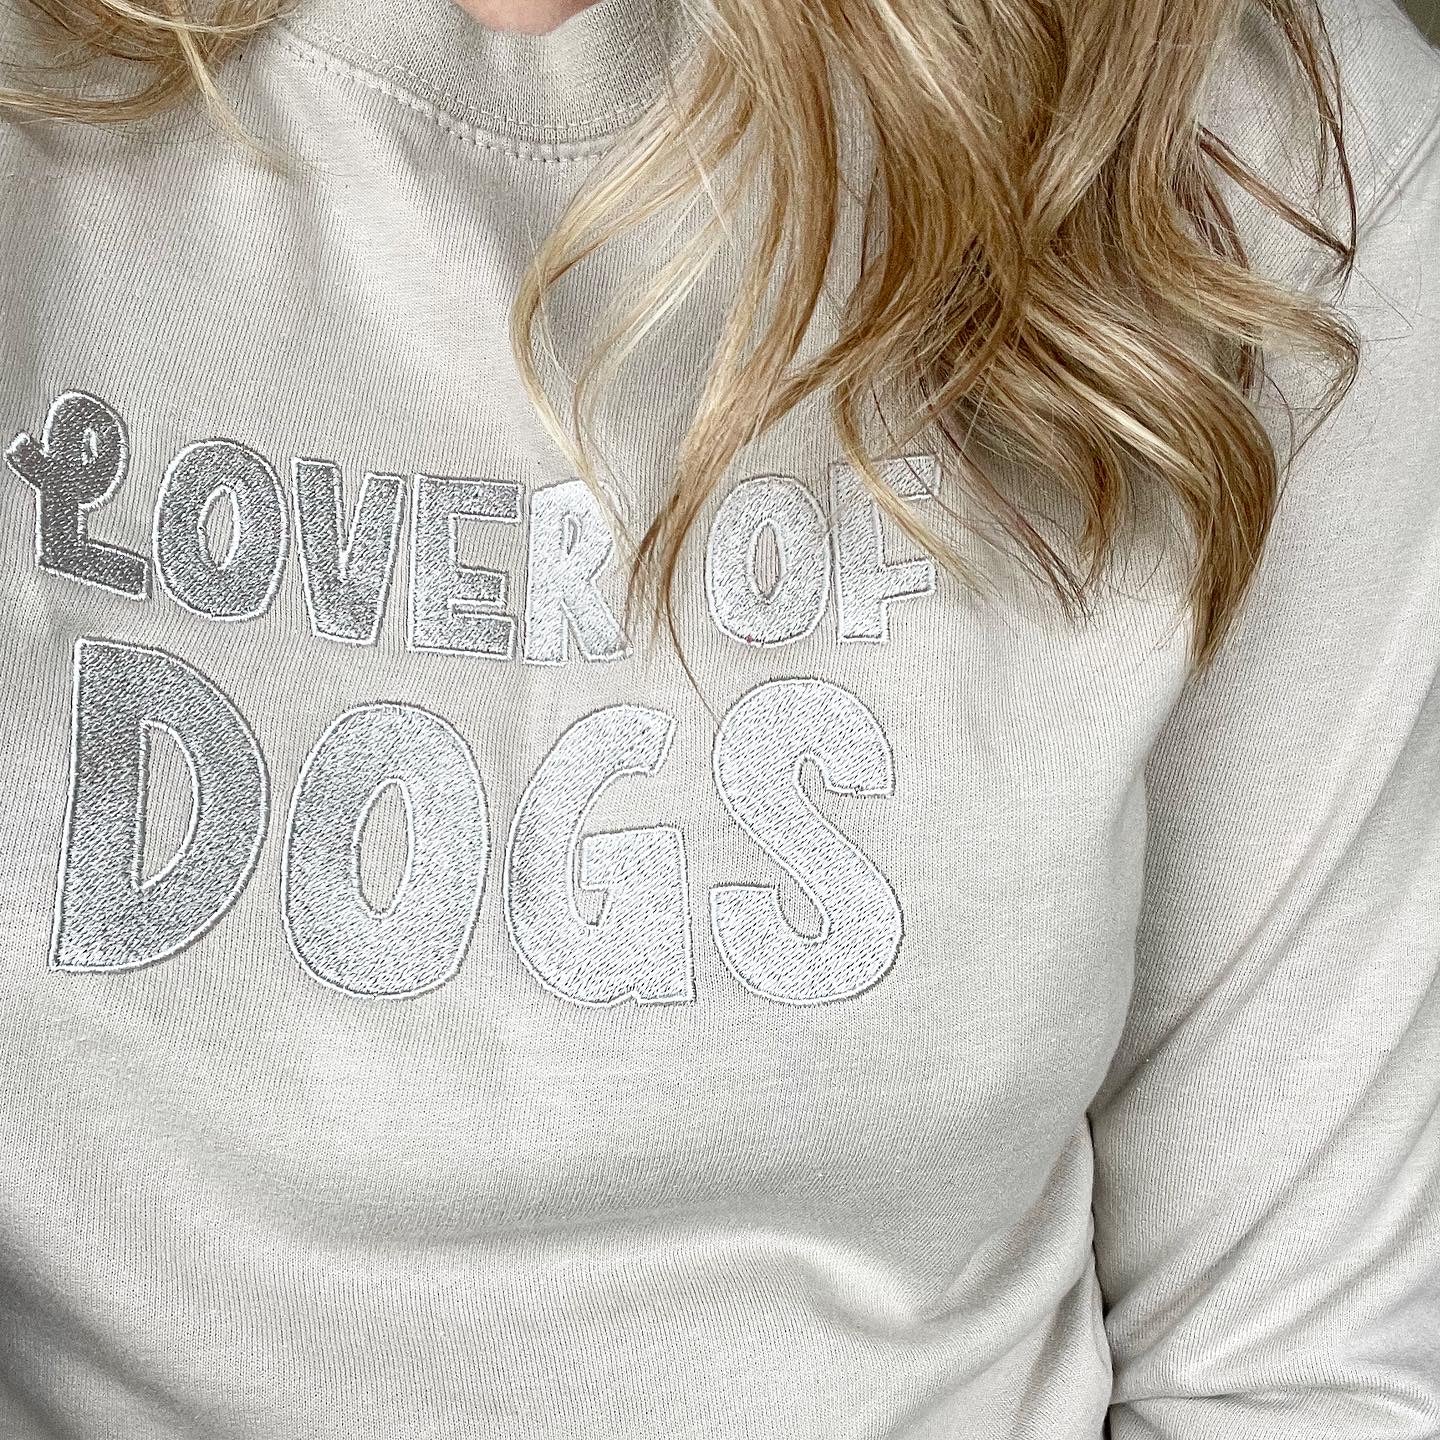 Embroidered Lover of Dogs Sweatshirt